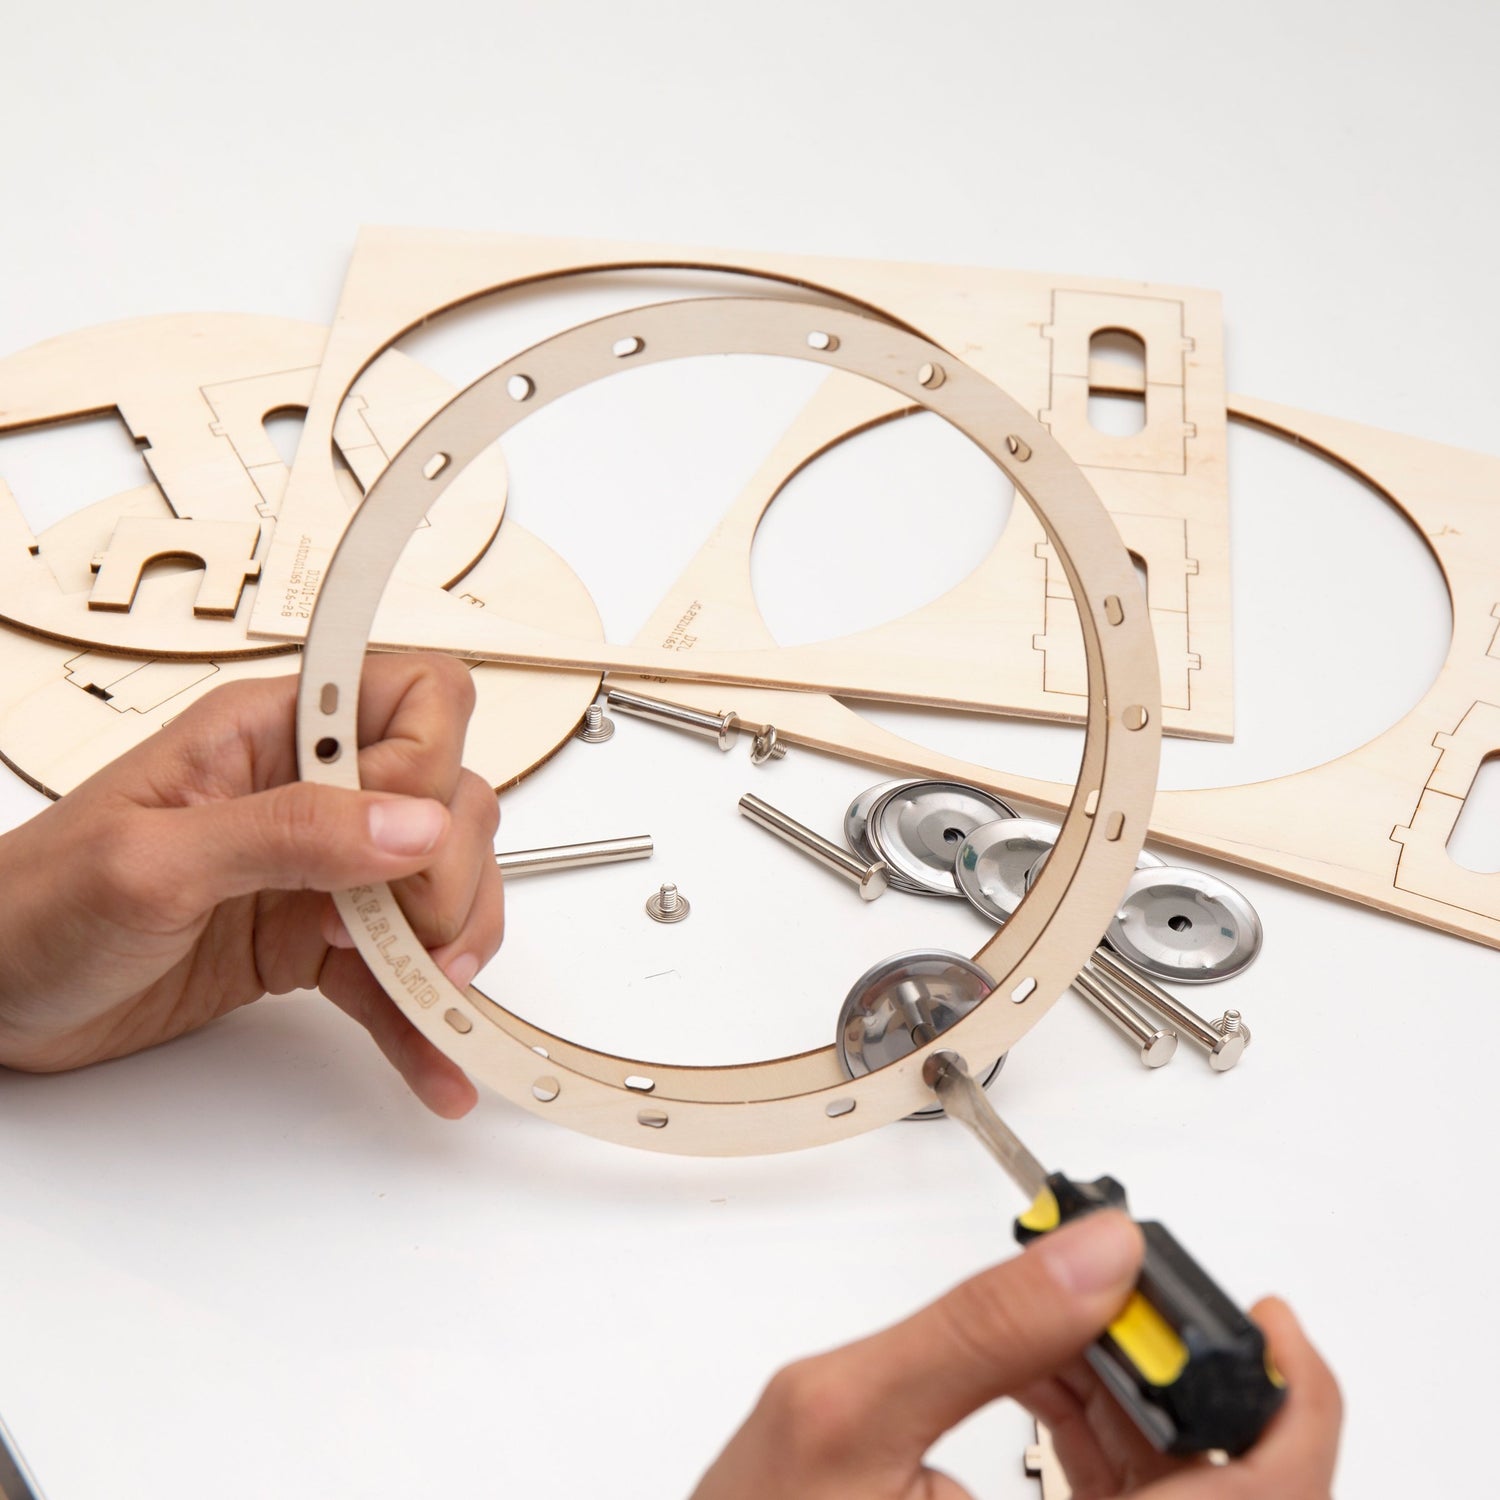 Make Your Own Tambourine - Do It Yourself Kit